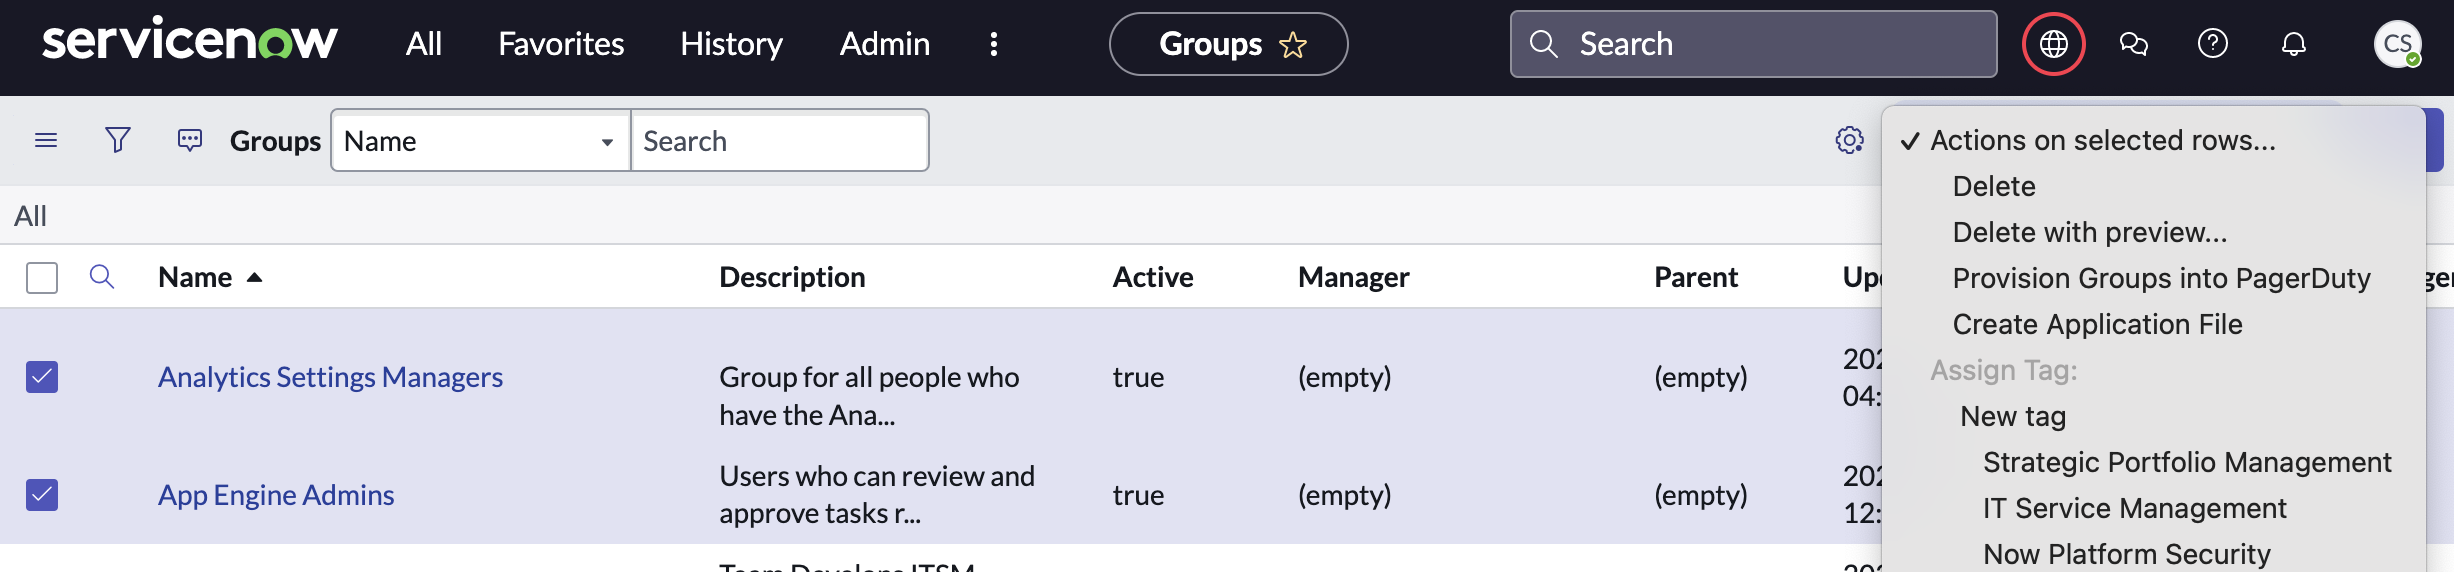 Select "Provision Group into PagerDuty" from the dropdown menu